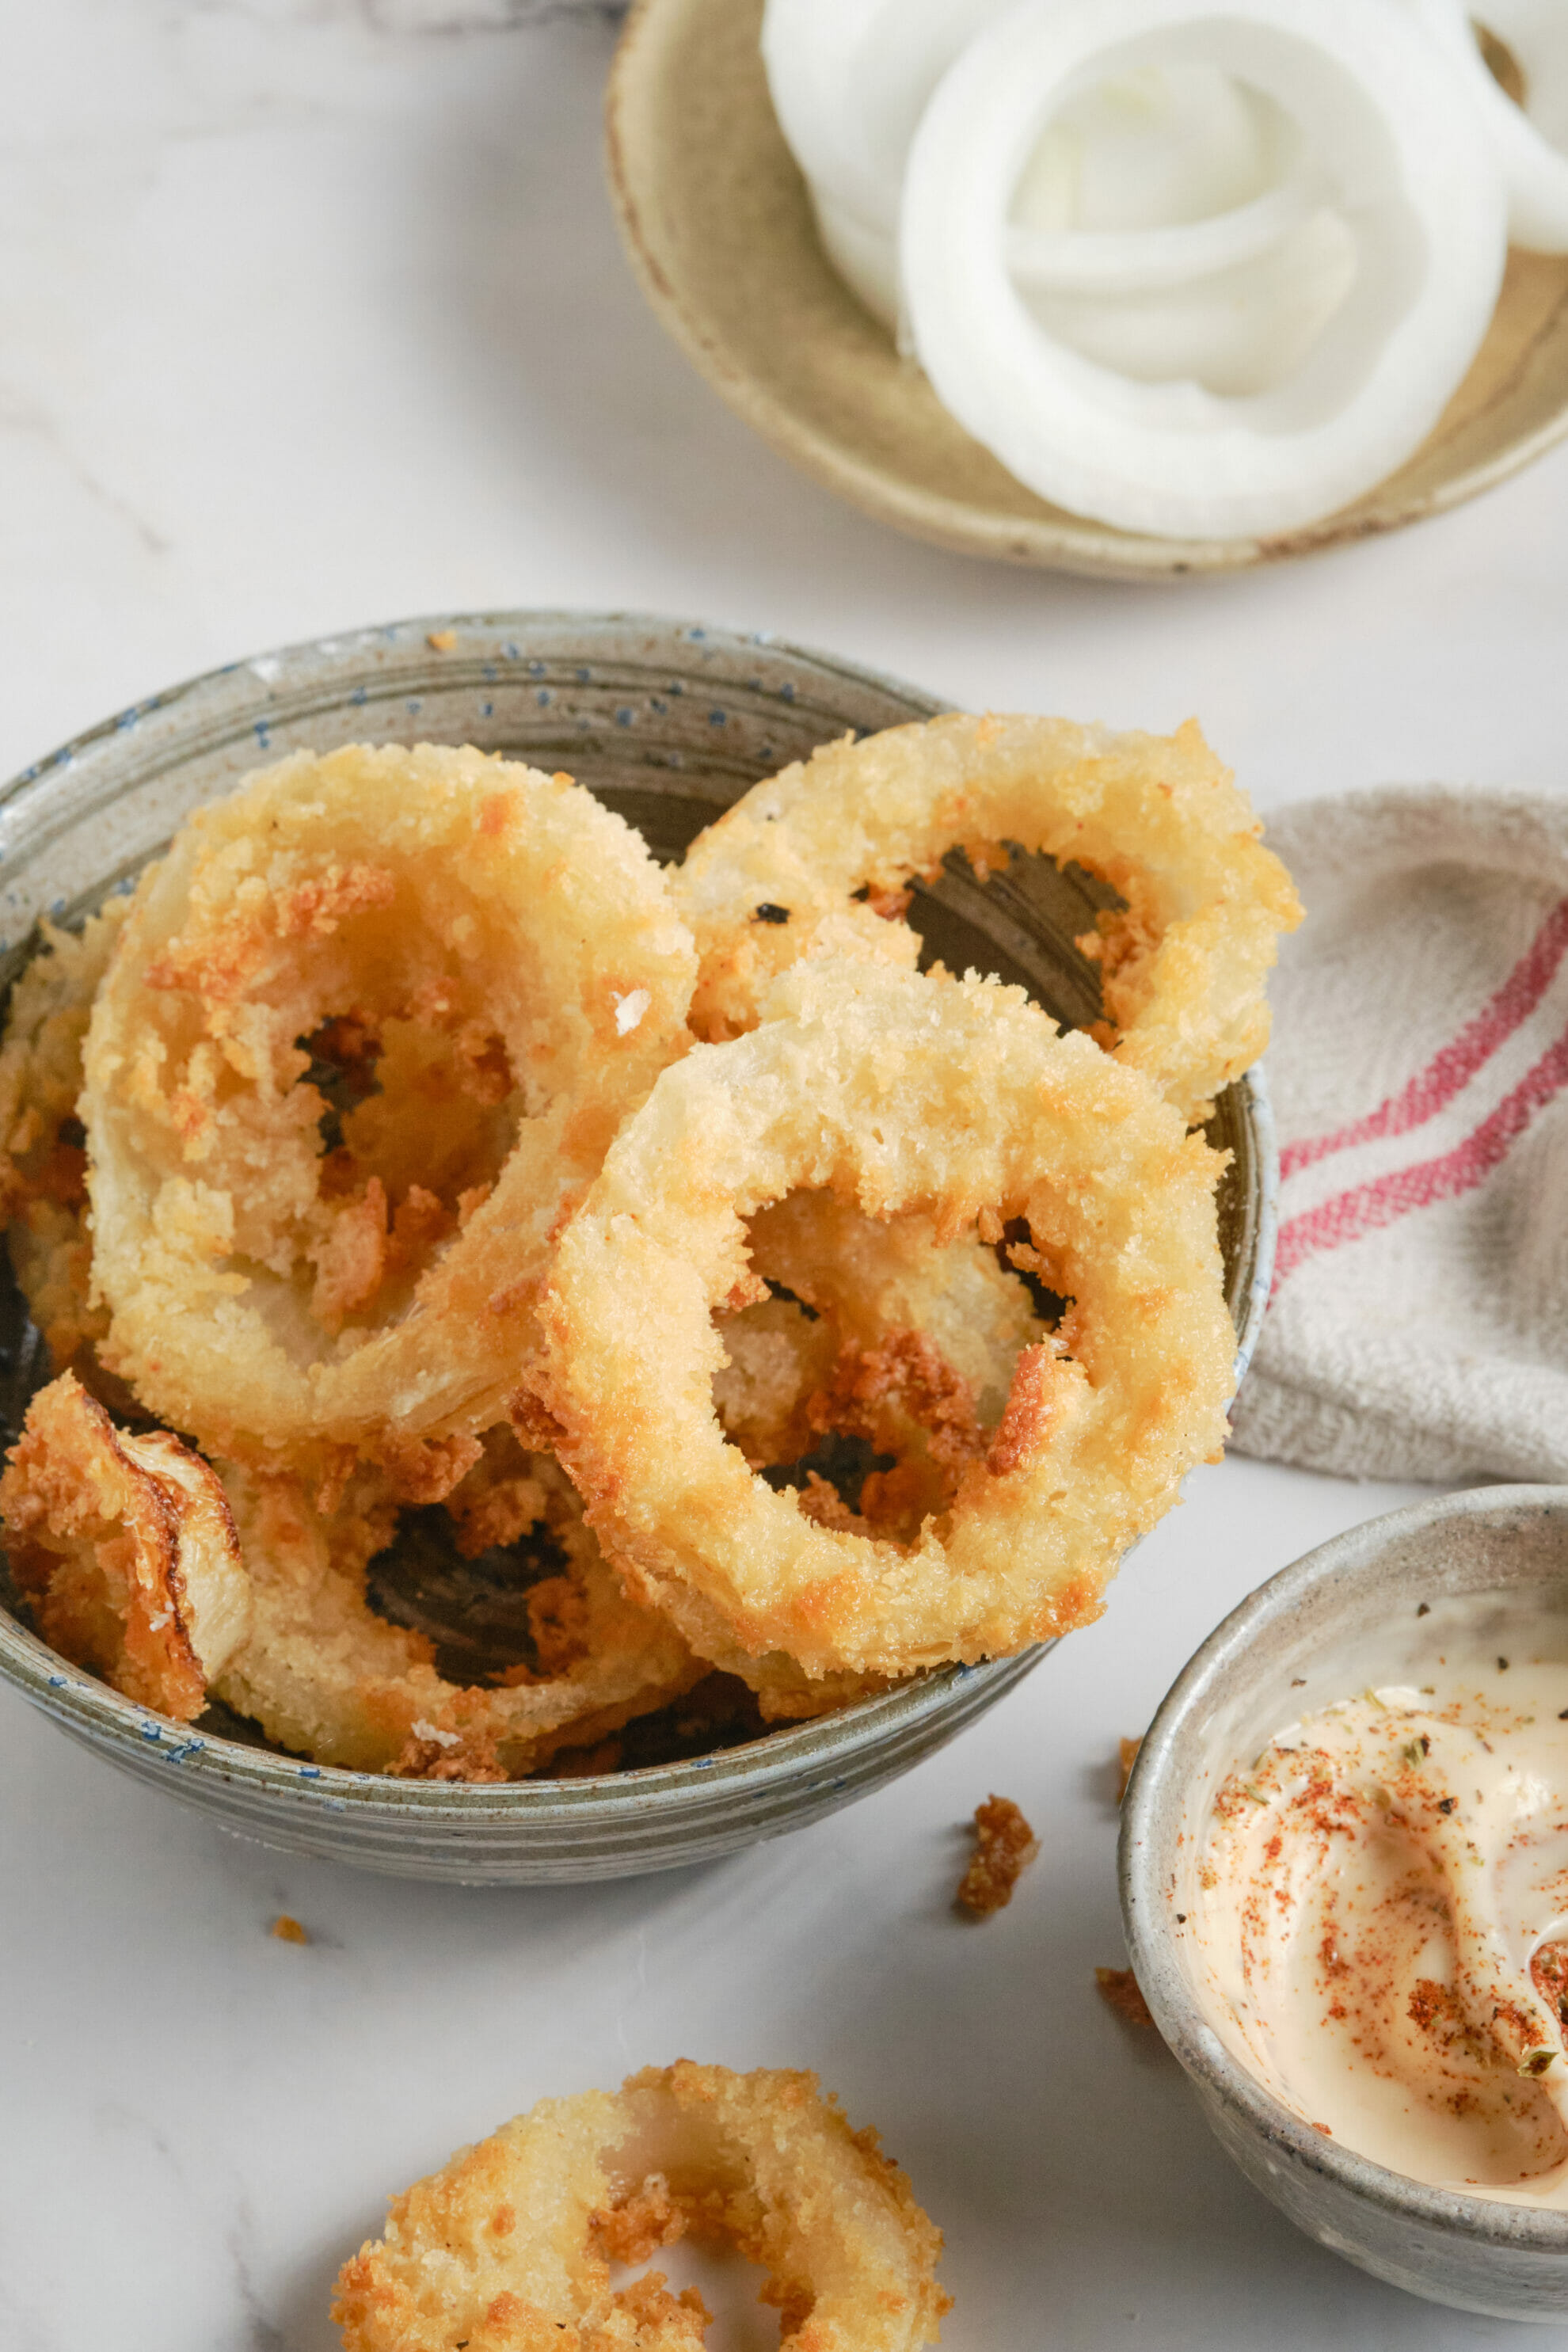 Onion Rings Recipe: How to Make Onion Rings Recipe | Homemade Onion Rings  Recipe